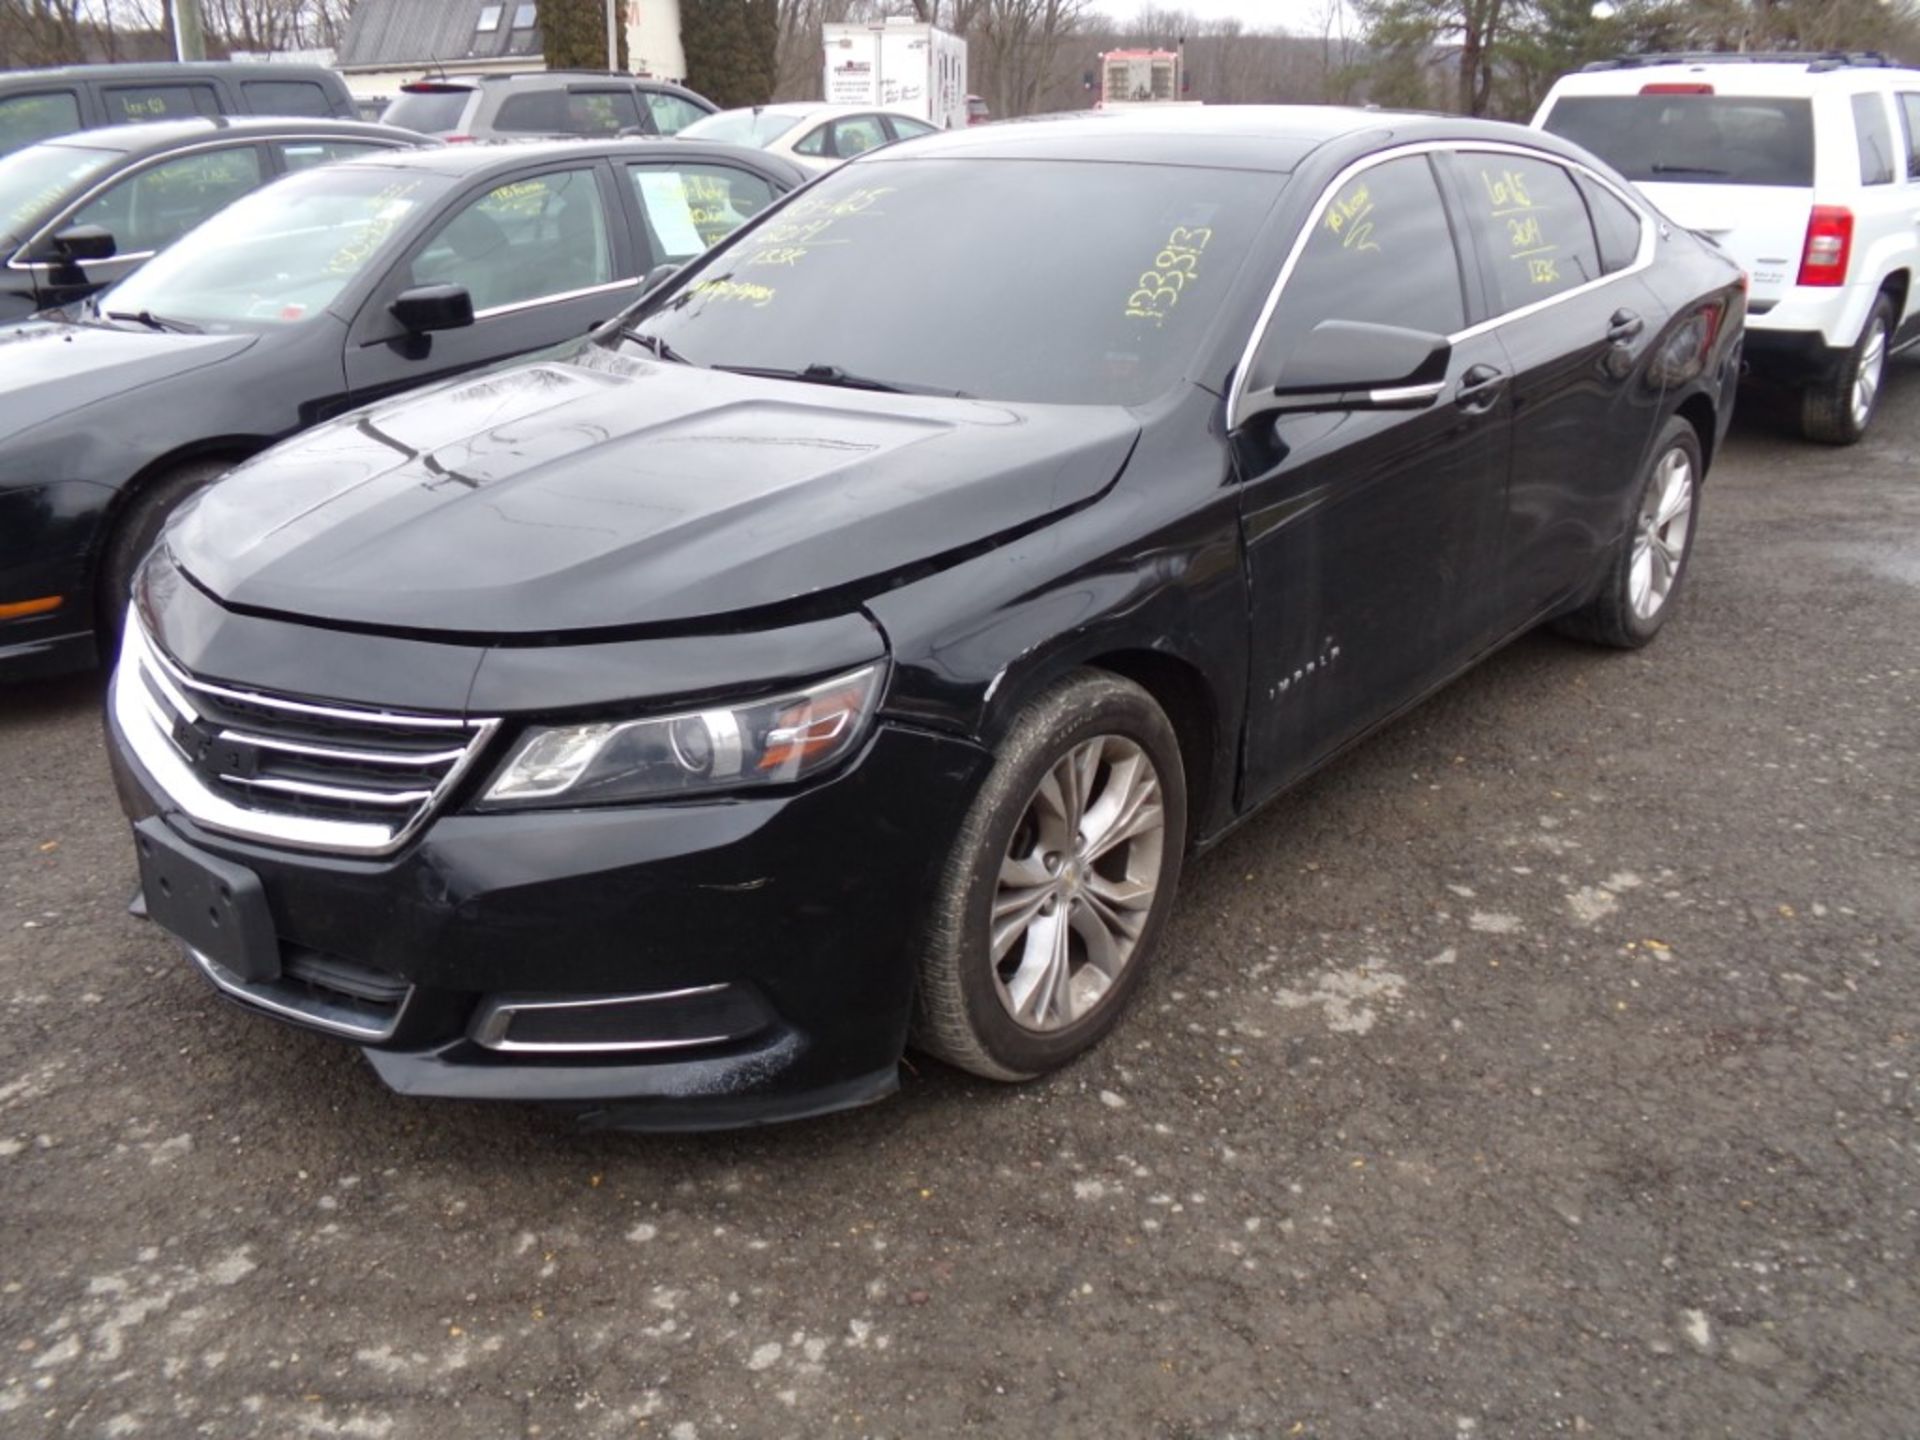 2014 Chevrolet Impala LT, Leather, Windows Are Tinted, Includig Front Windshield, Black, 133,313